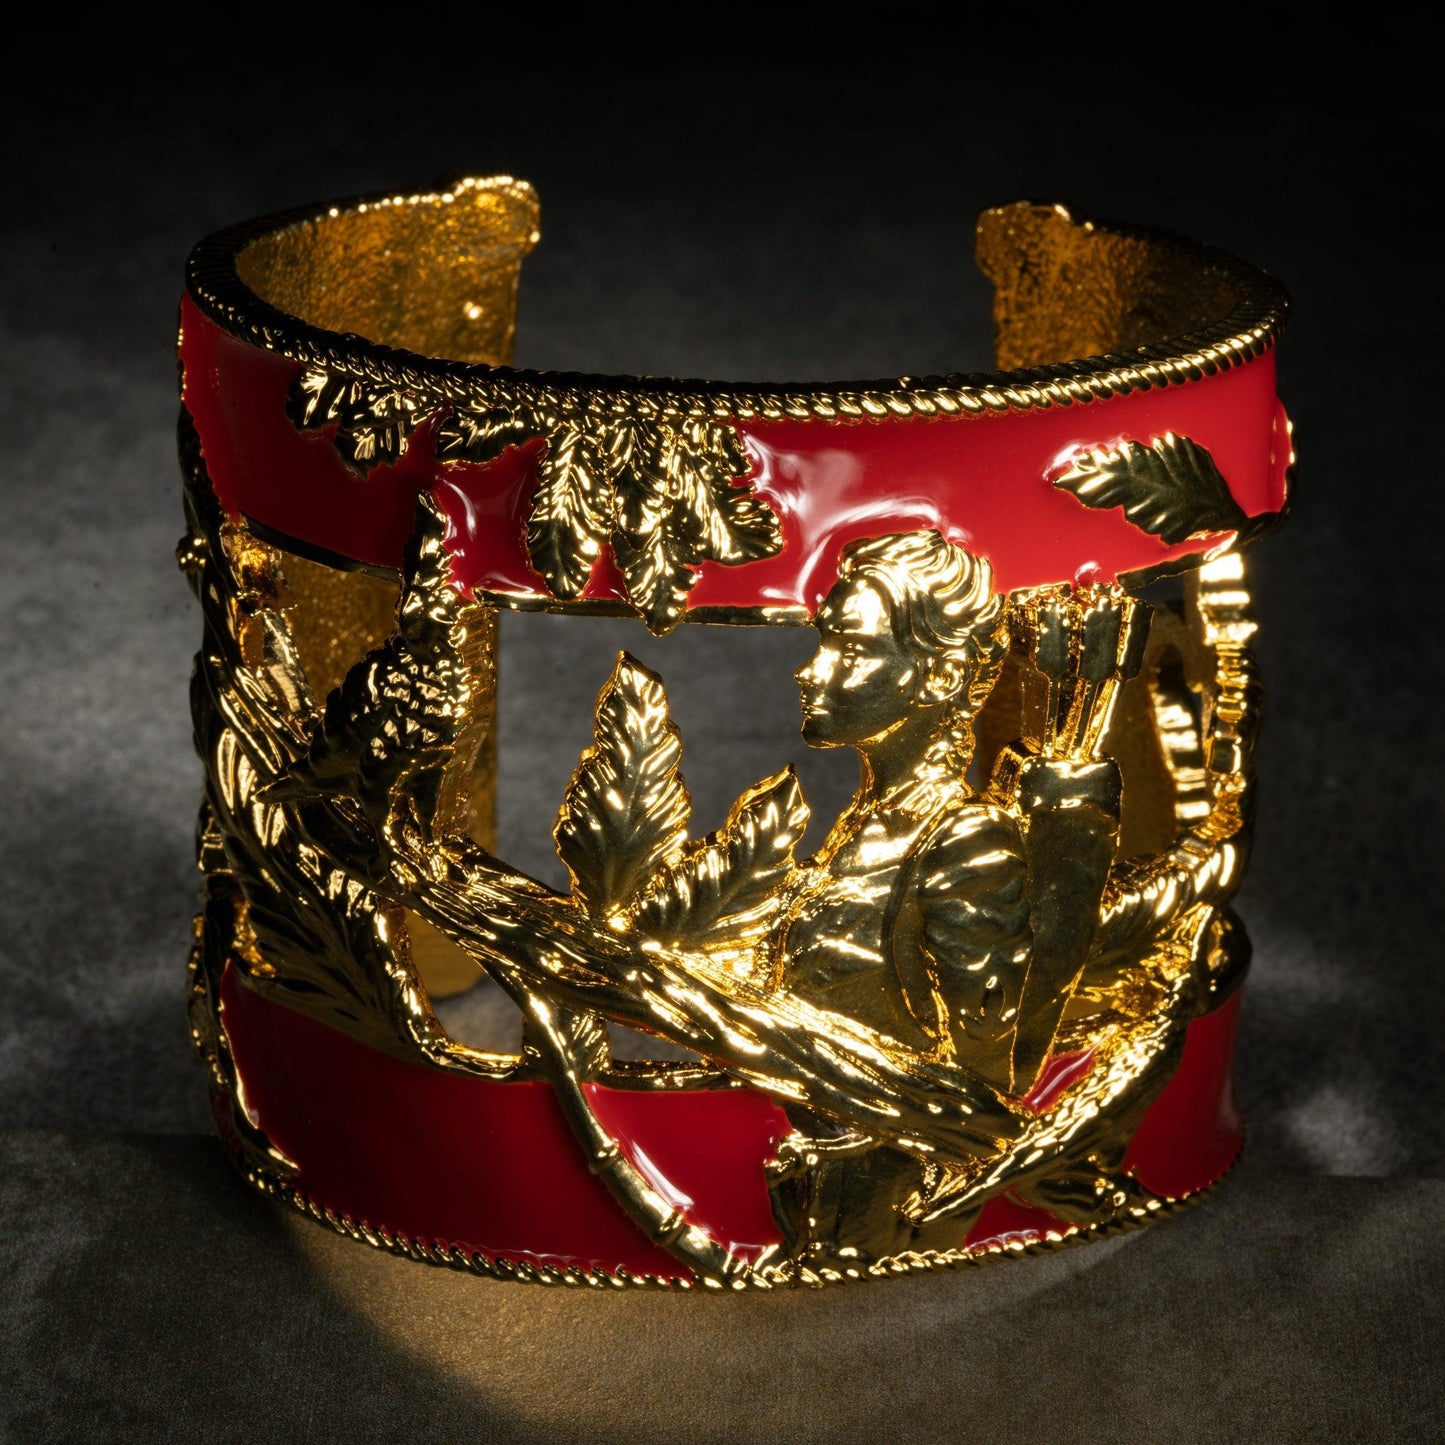 Unique Cuff Bracelet "Vigor" - Gold & Red Gift, Gift For Mom, Artistic, Jewelry Cuff, Bracelet, Gold, Silver, Brass